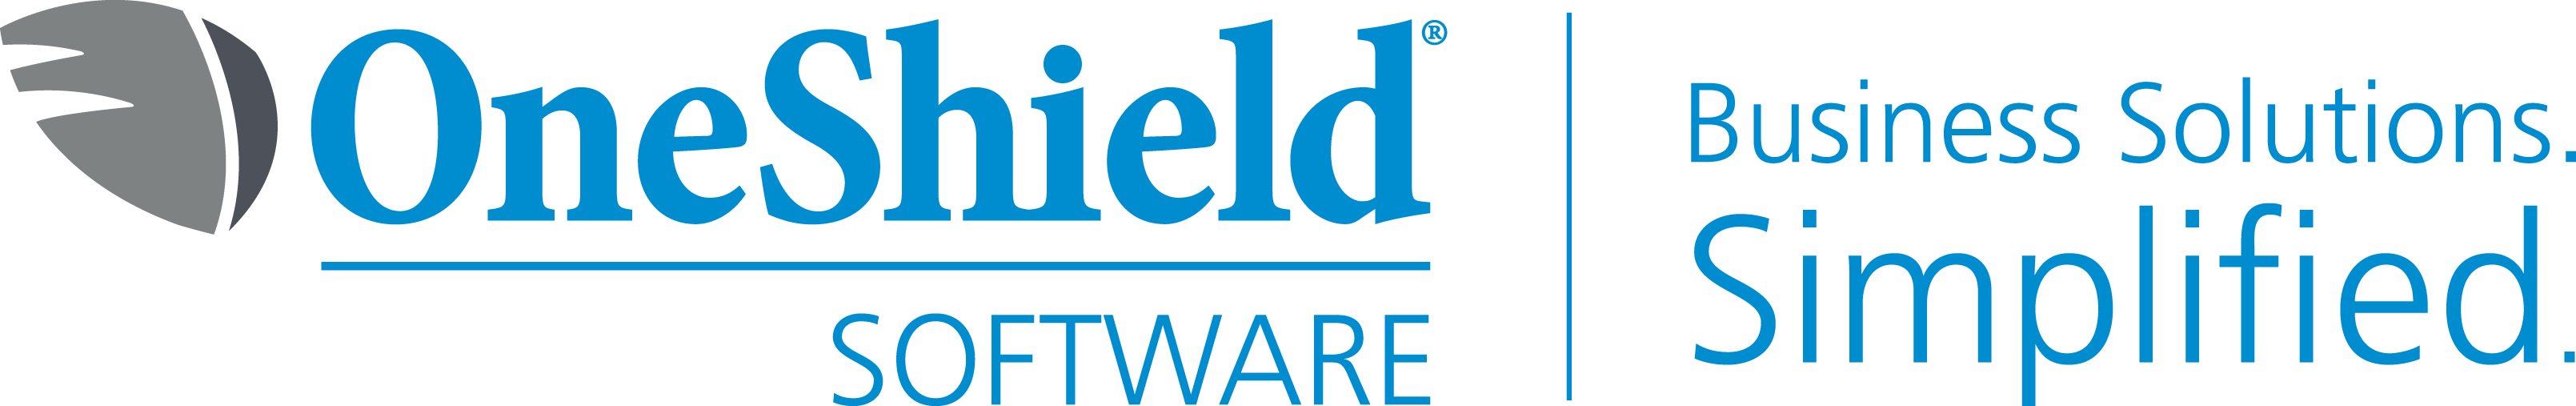 OneShield Software a